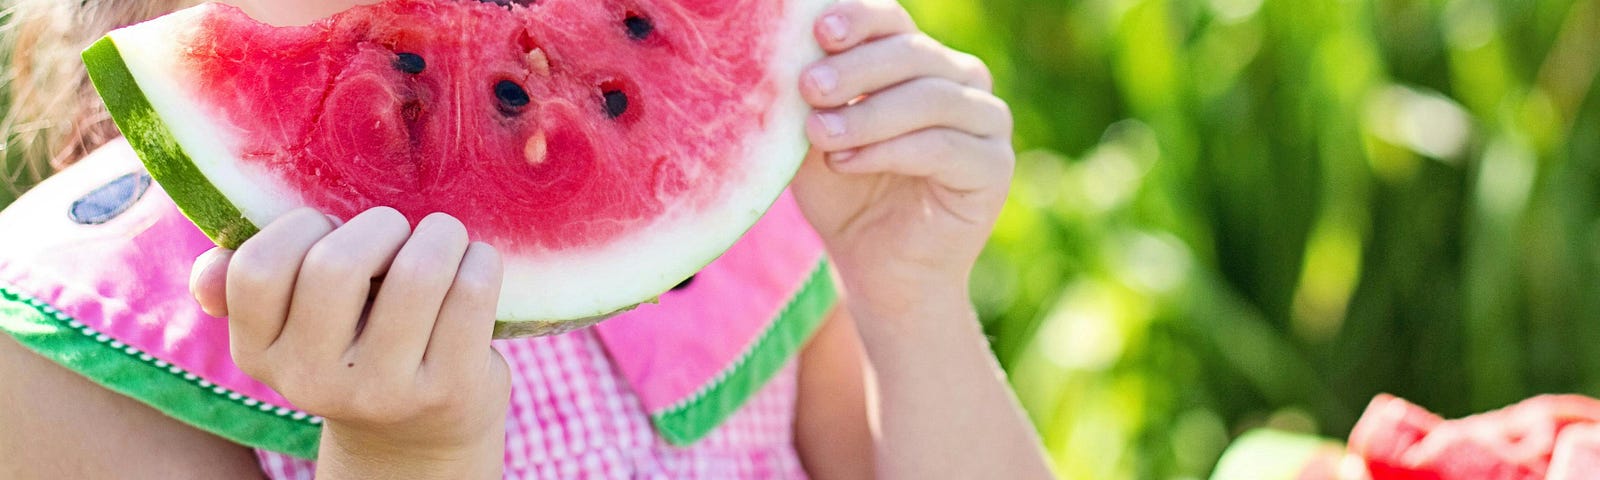 Image shows little girl wearing a pink summer dress and eating a large slice of watermelon beside a bowl of more watermelon. Tall plants in background on a bright sunny day.